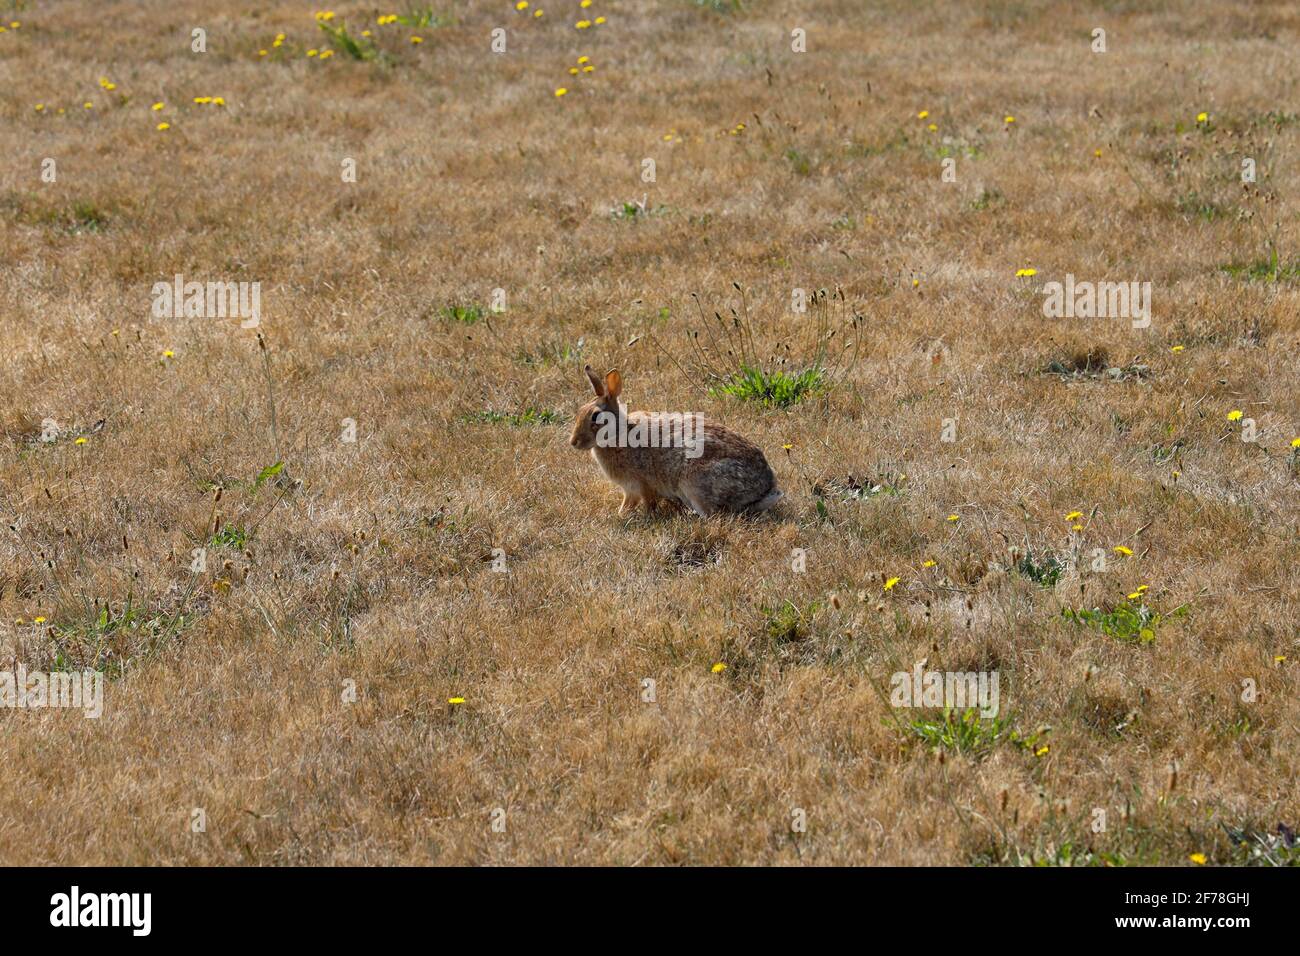 Bunny Rabbit in the Grass by the Sea-Side Walking Trail at NAS Whidbey Island, Oak Harbor, WA Stock Photo